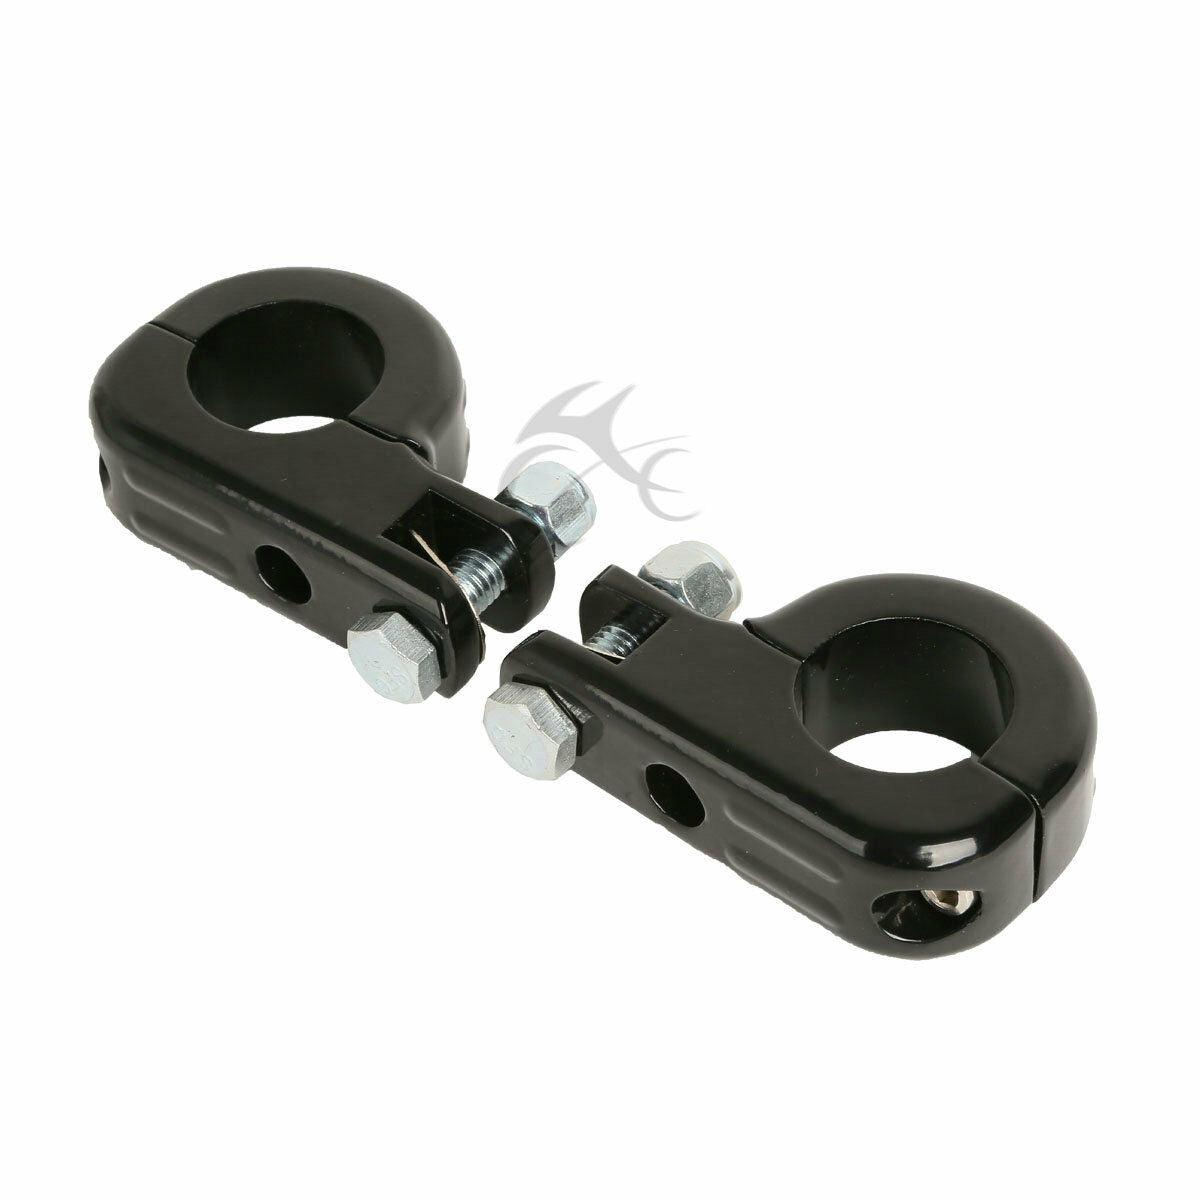 1 1/4" Engine Guards Crash Bars Foot Pegs Footrest Mount Fit For Harley Touring - Moto Life Products